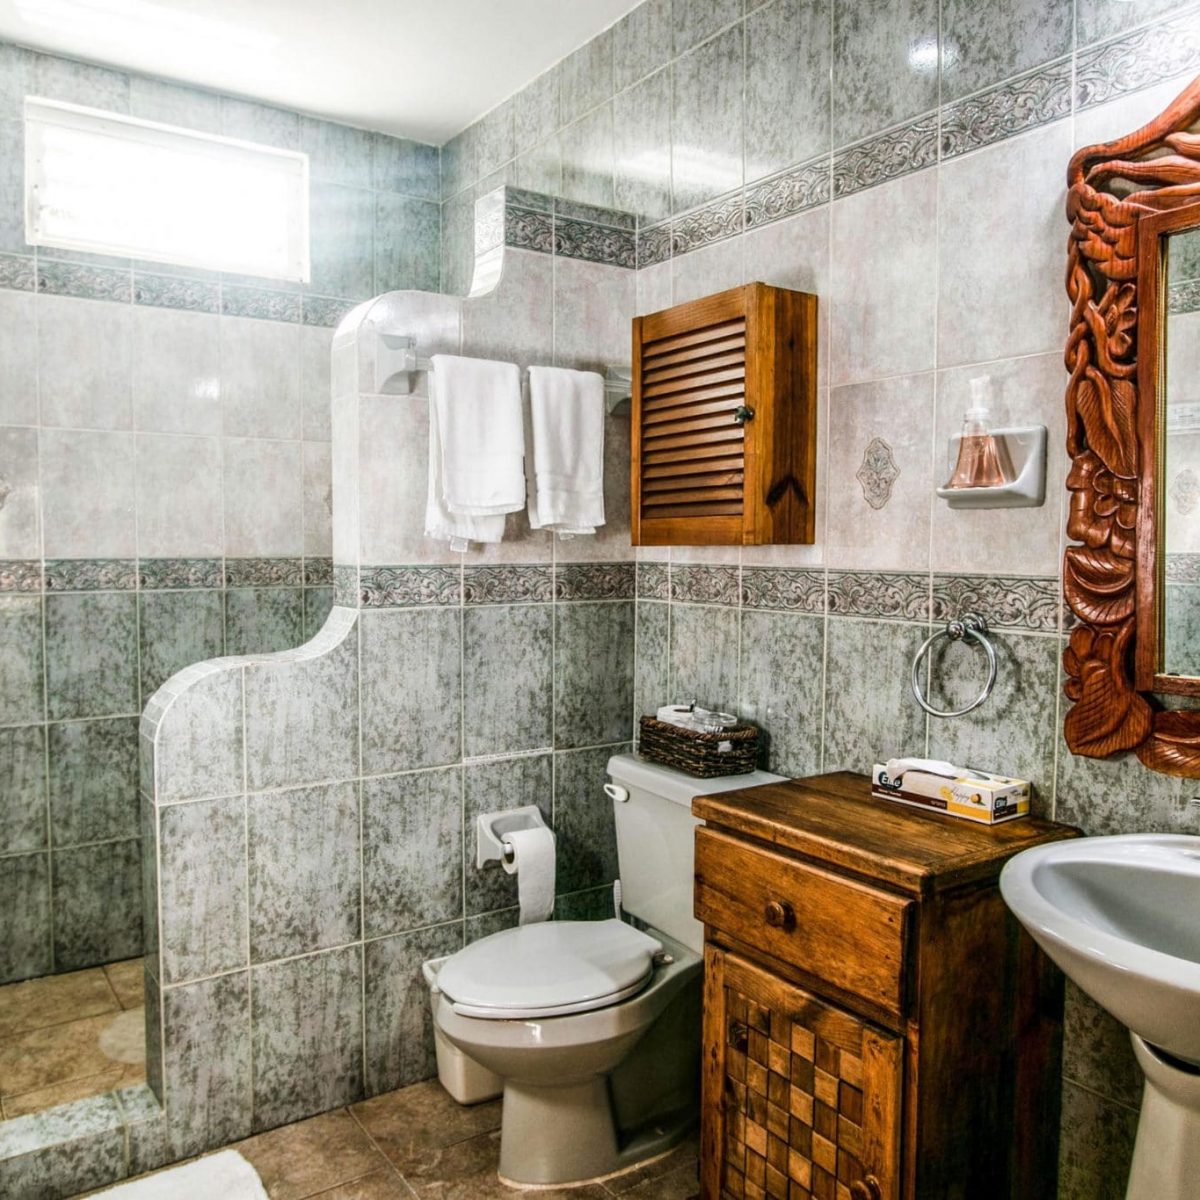 Villa Jardin, La Sirena #16, The Downstairs Bath Has a Large Shower and Sink Area and is Fully Tiled in Soothing Aqua